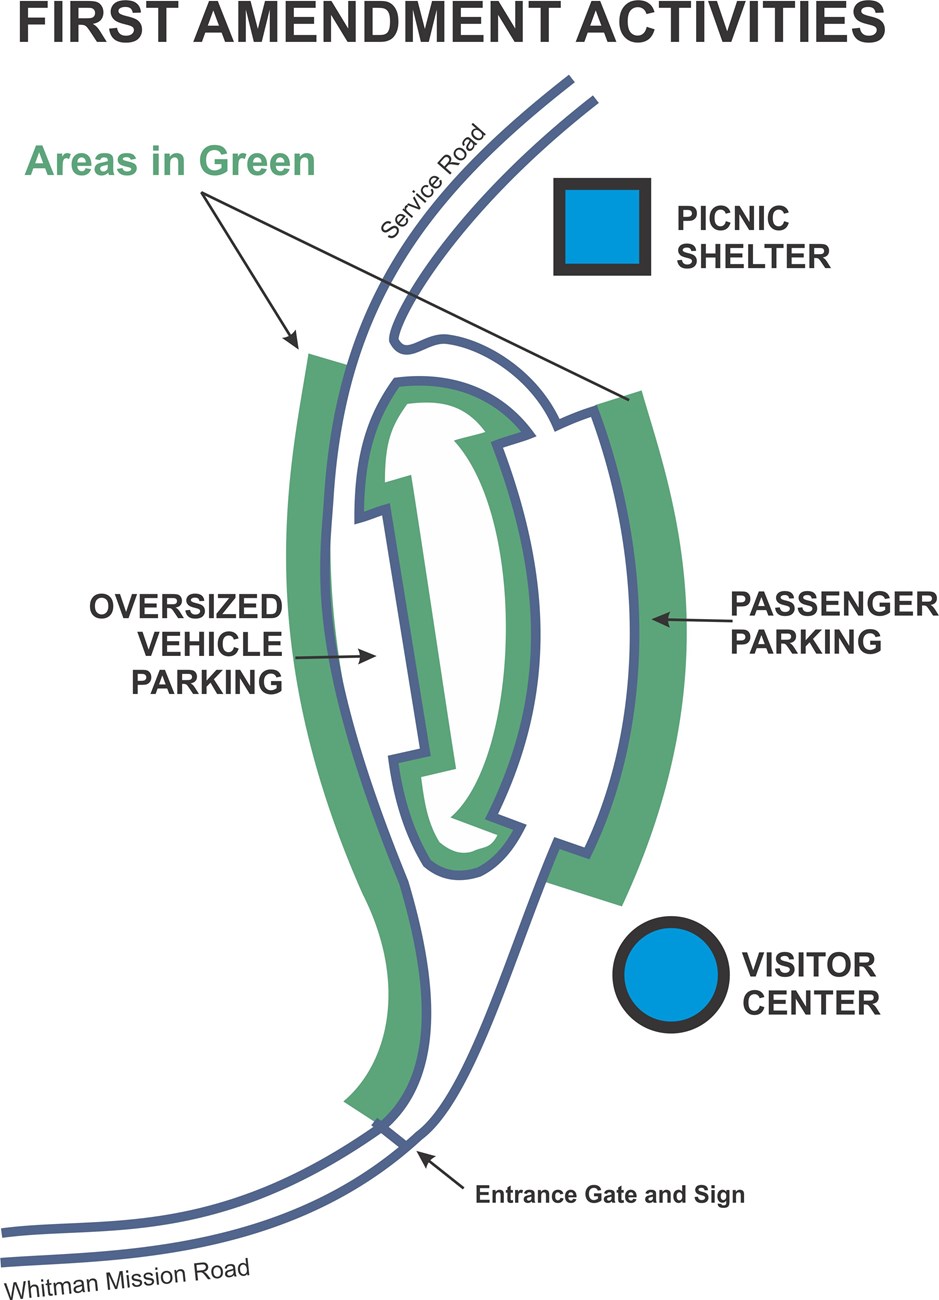 Designated First Amendment areas include the east edge of parking lot, the edges around the island next to parking lot, and along the west side of the road from the entrance gate to the northern end of the parking loop.